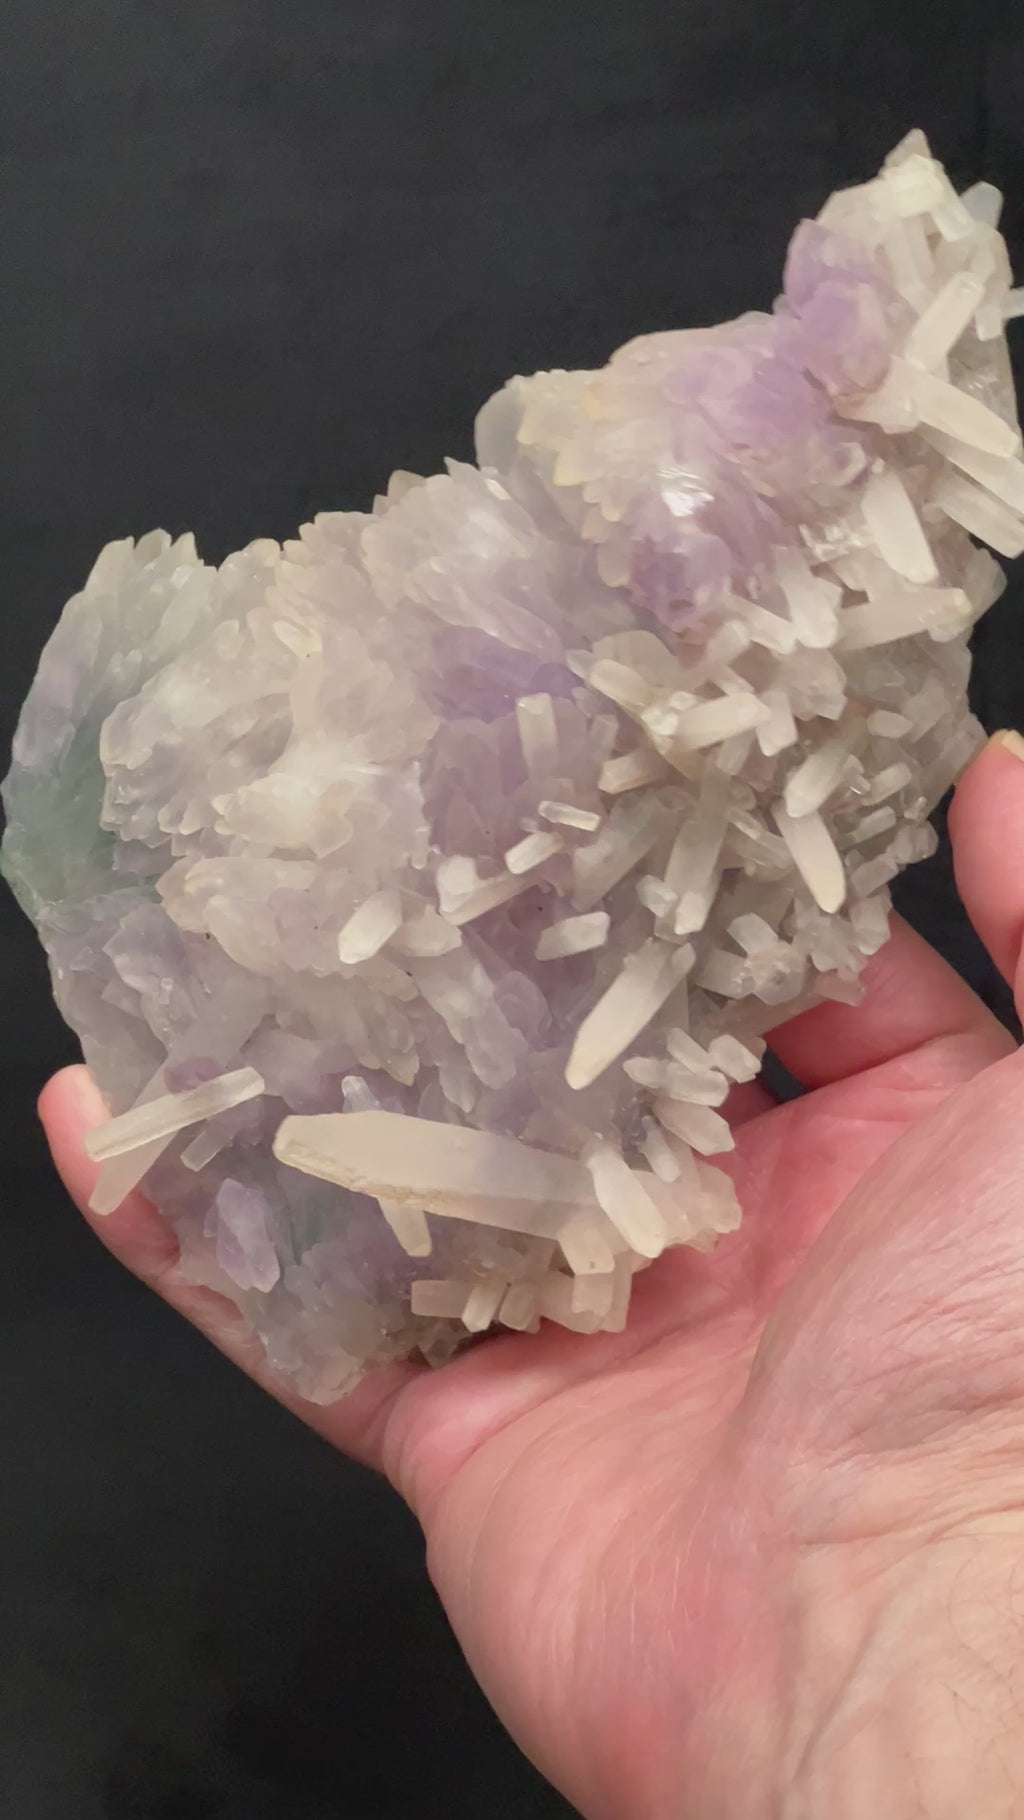 Given the size, unusual formation and presentation of the crystals, and the degree of difficulty to extract large specimens like this one, this is truly a less common, quality Amethyst Flower with elongated Calcite piece. An excellent one for your collection or to give as a gift.